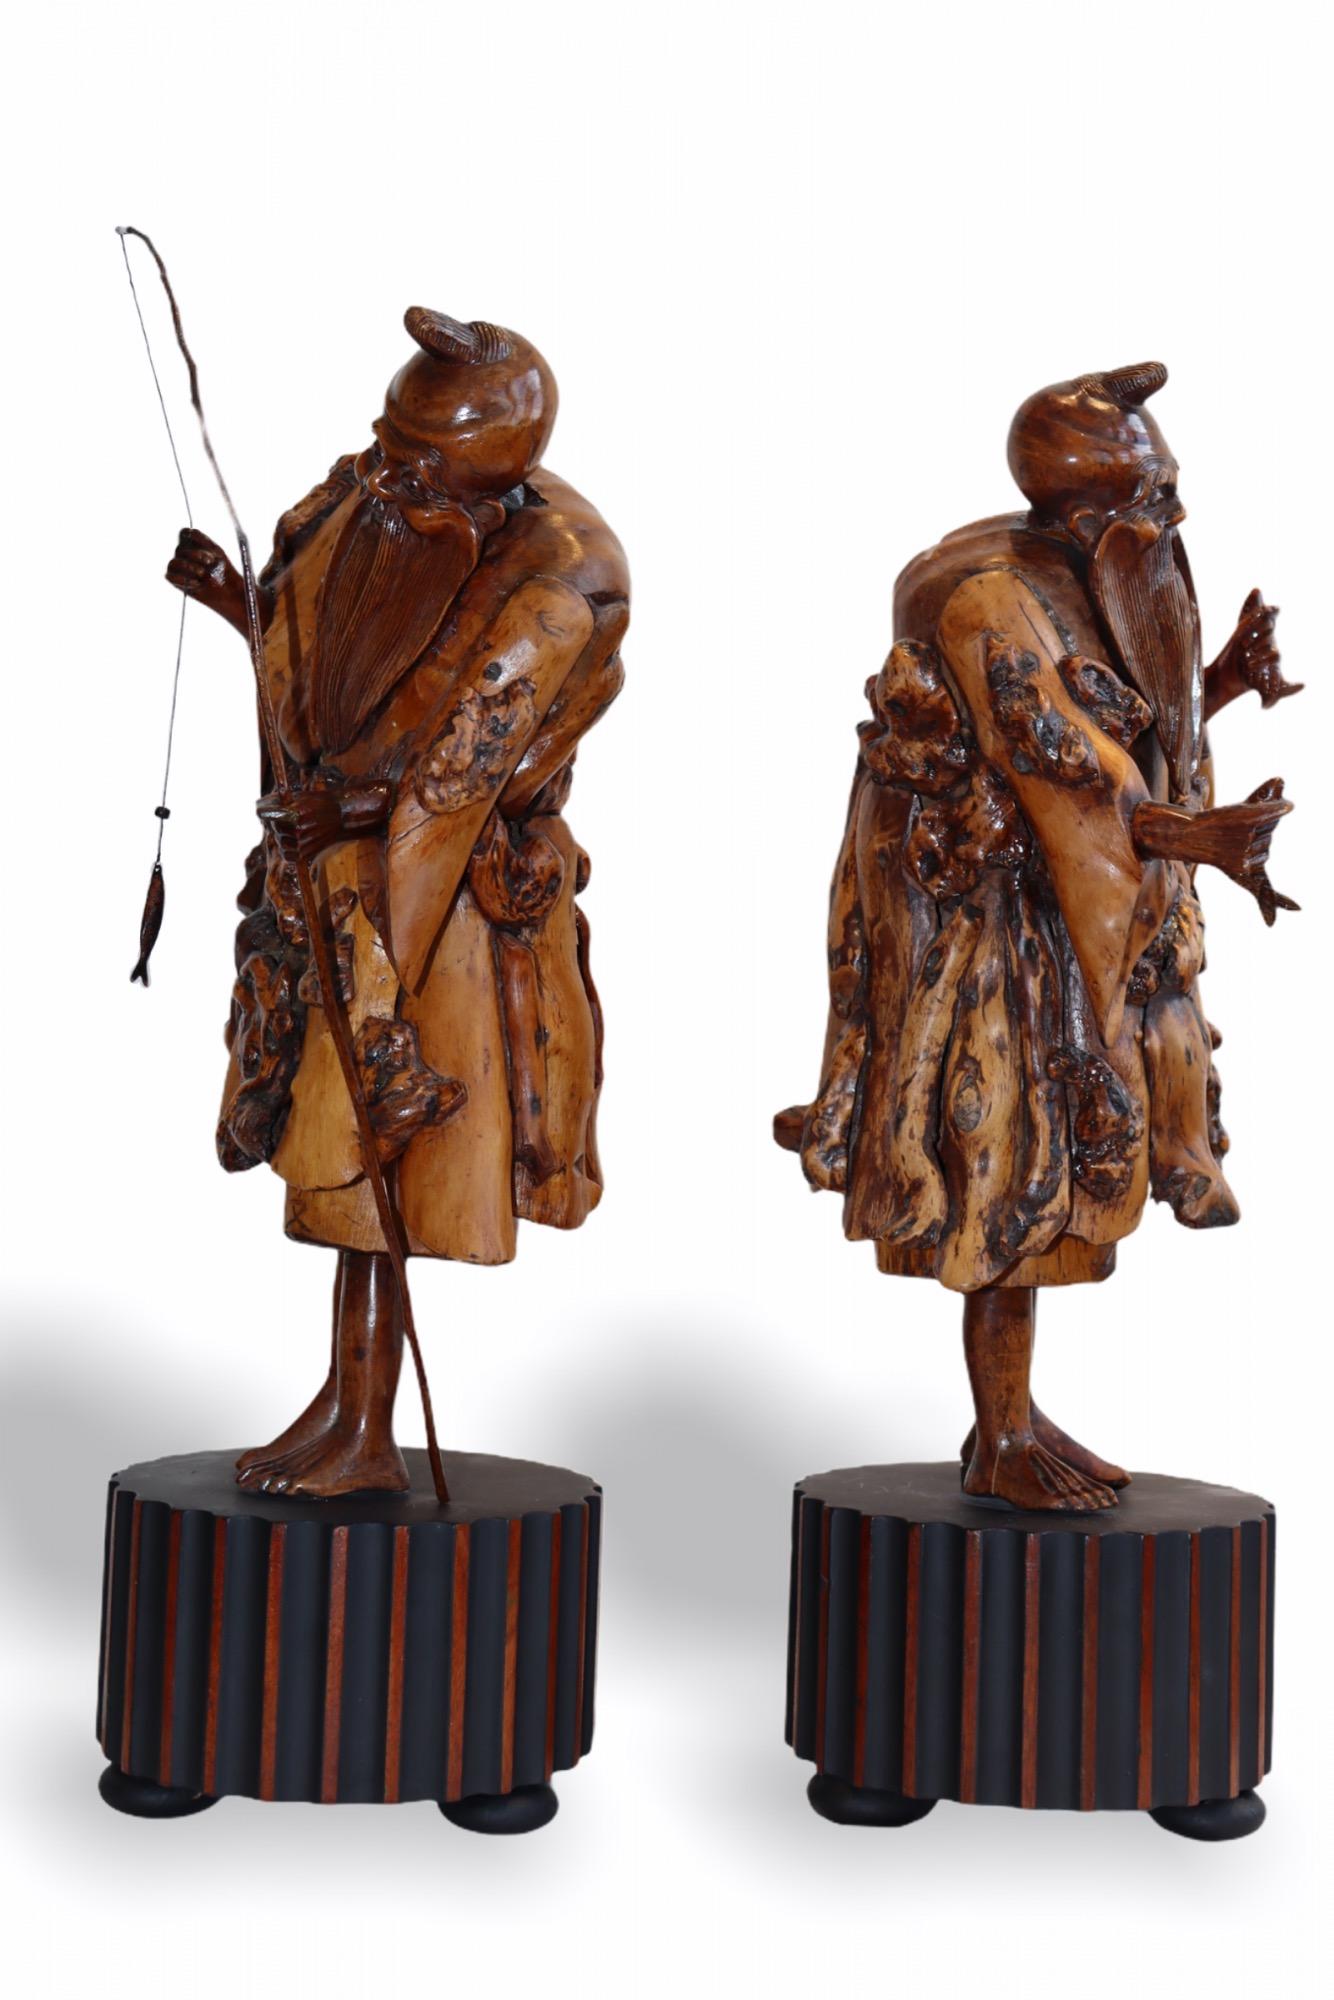 This pair has been meticulously carved into root wood, 18th-19th century. The natural form of the wood carved as emerging spirit of the monks who have been fruitful in their fishing endeavor. Both of them are showing their catch. The root wood has